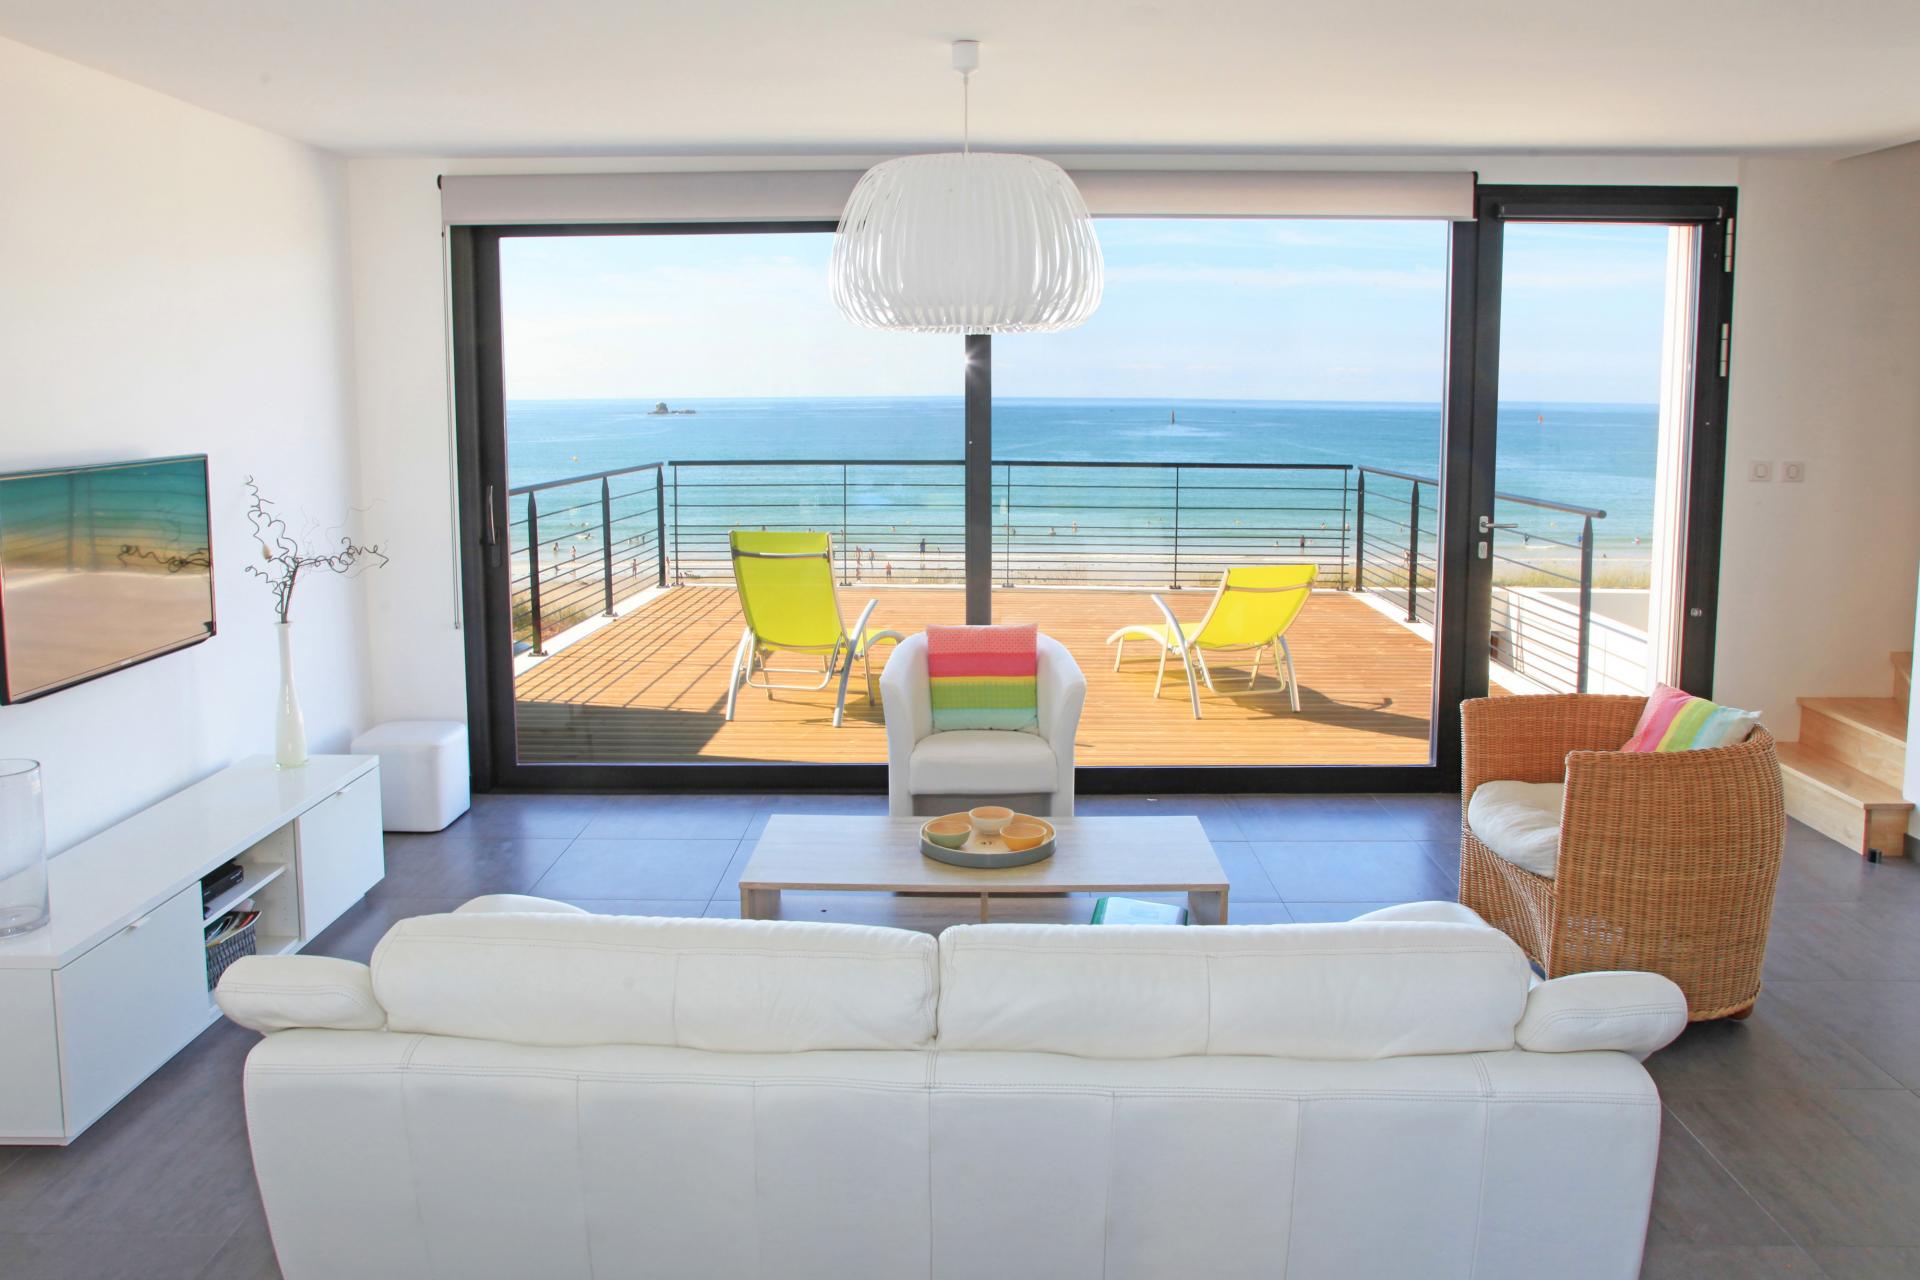 Great seaview from the living room